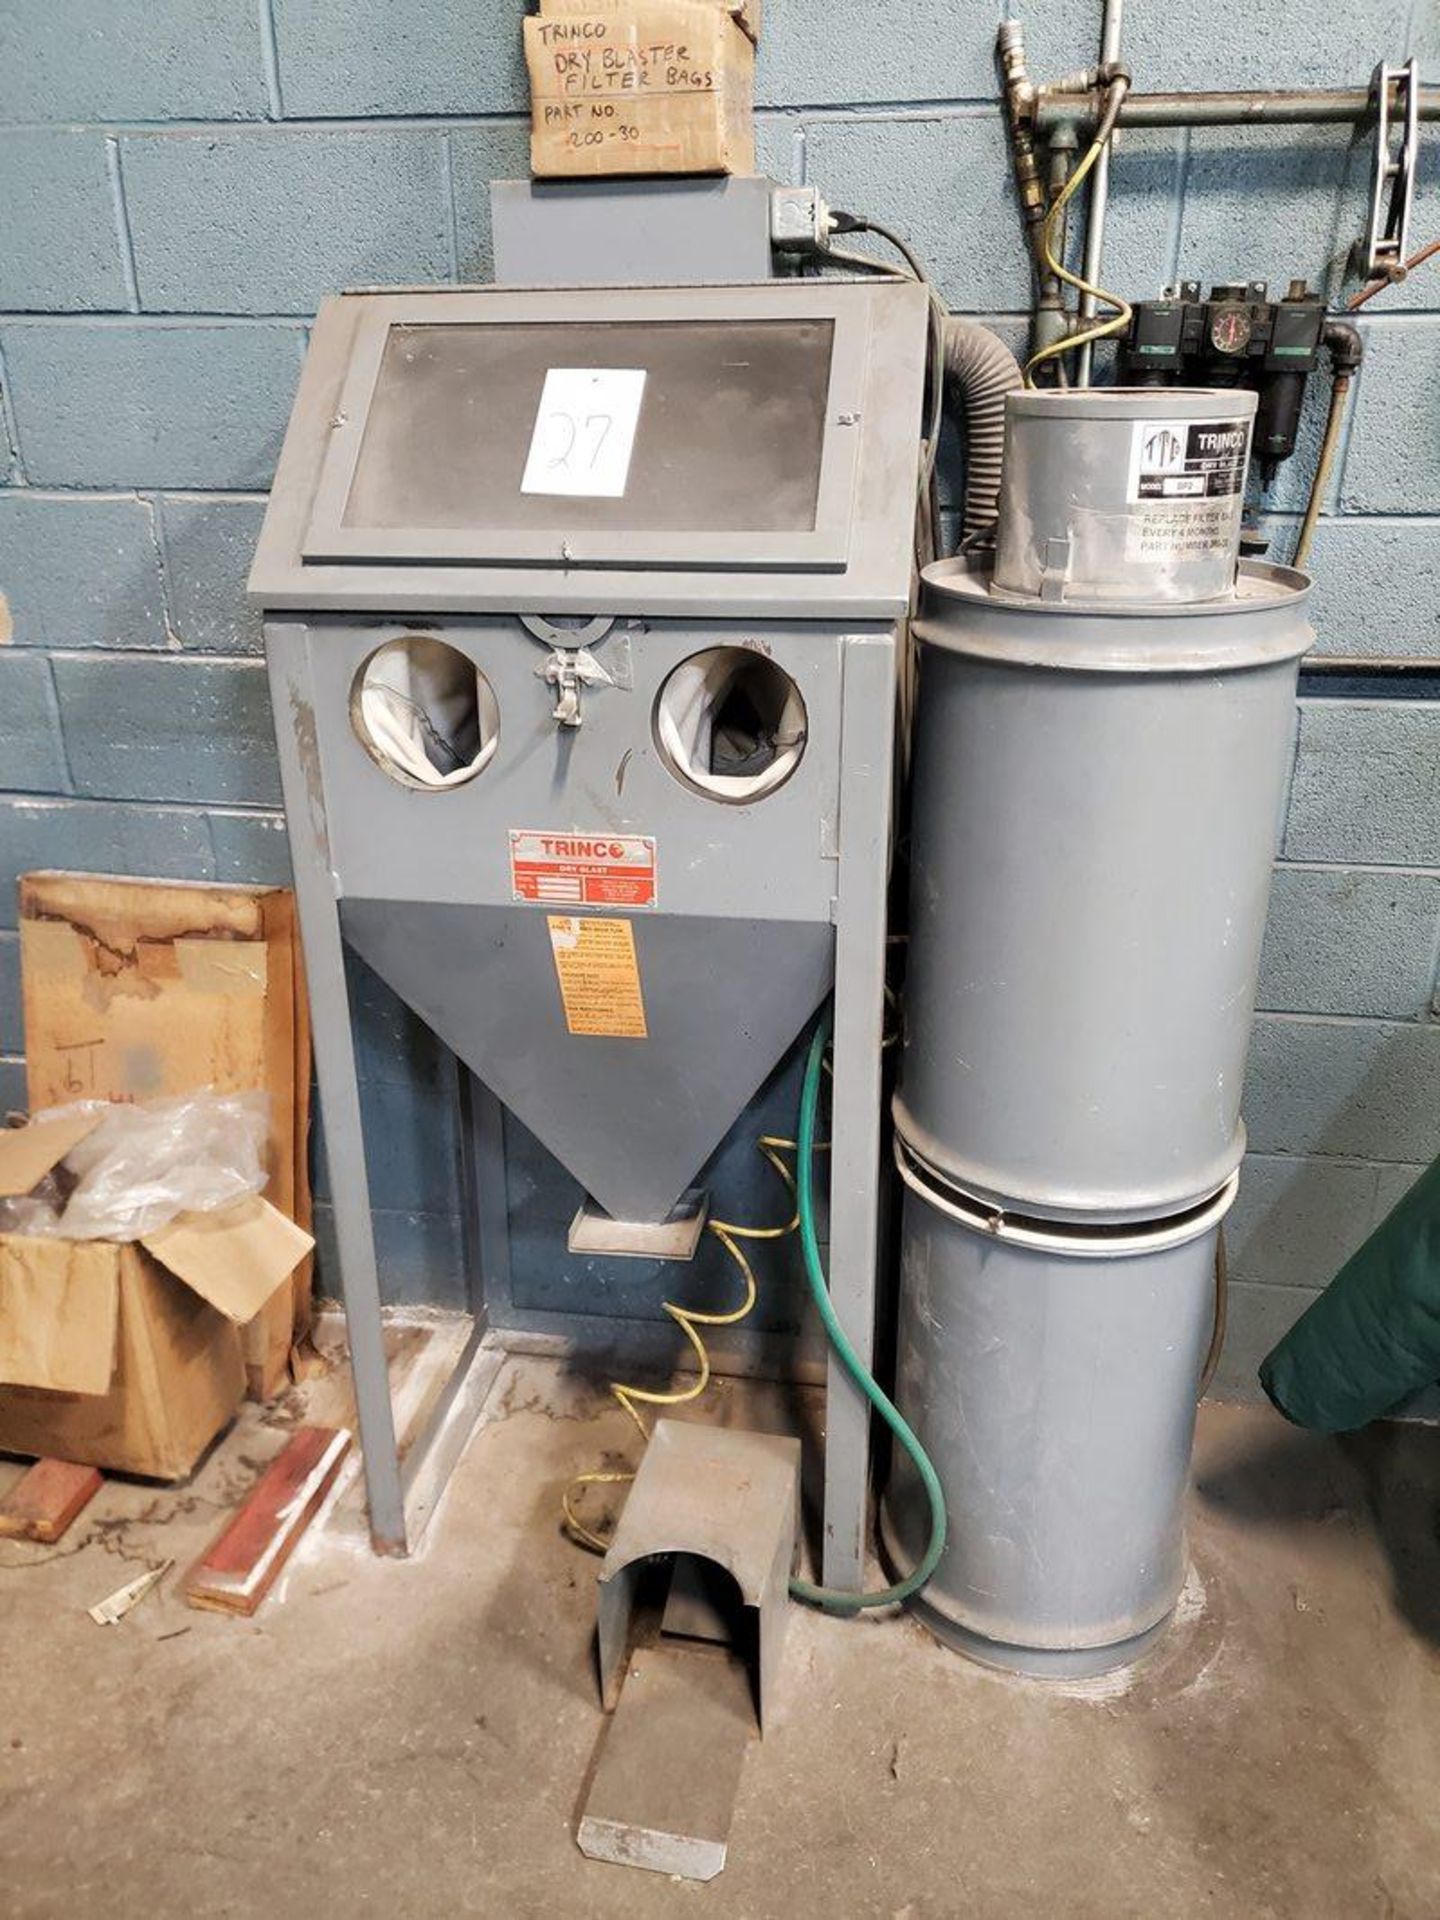 Trinco 24-BP blast Cabinet with Dust Collector, S/N 54149-0 - Image 2 of 2